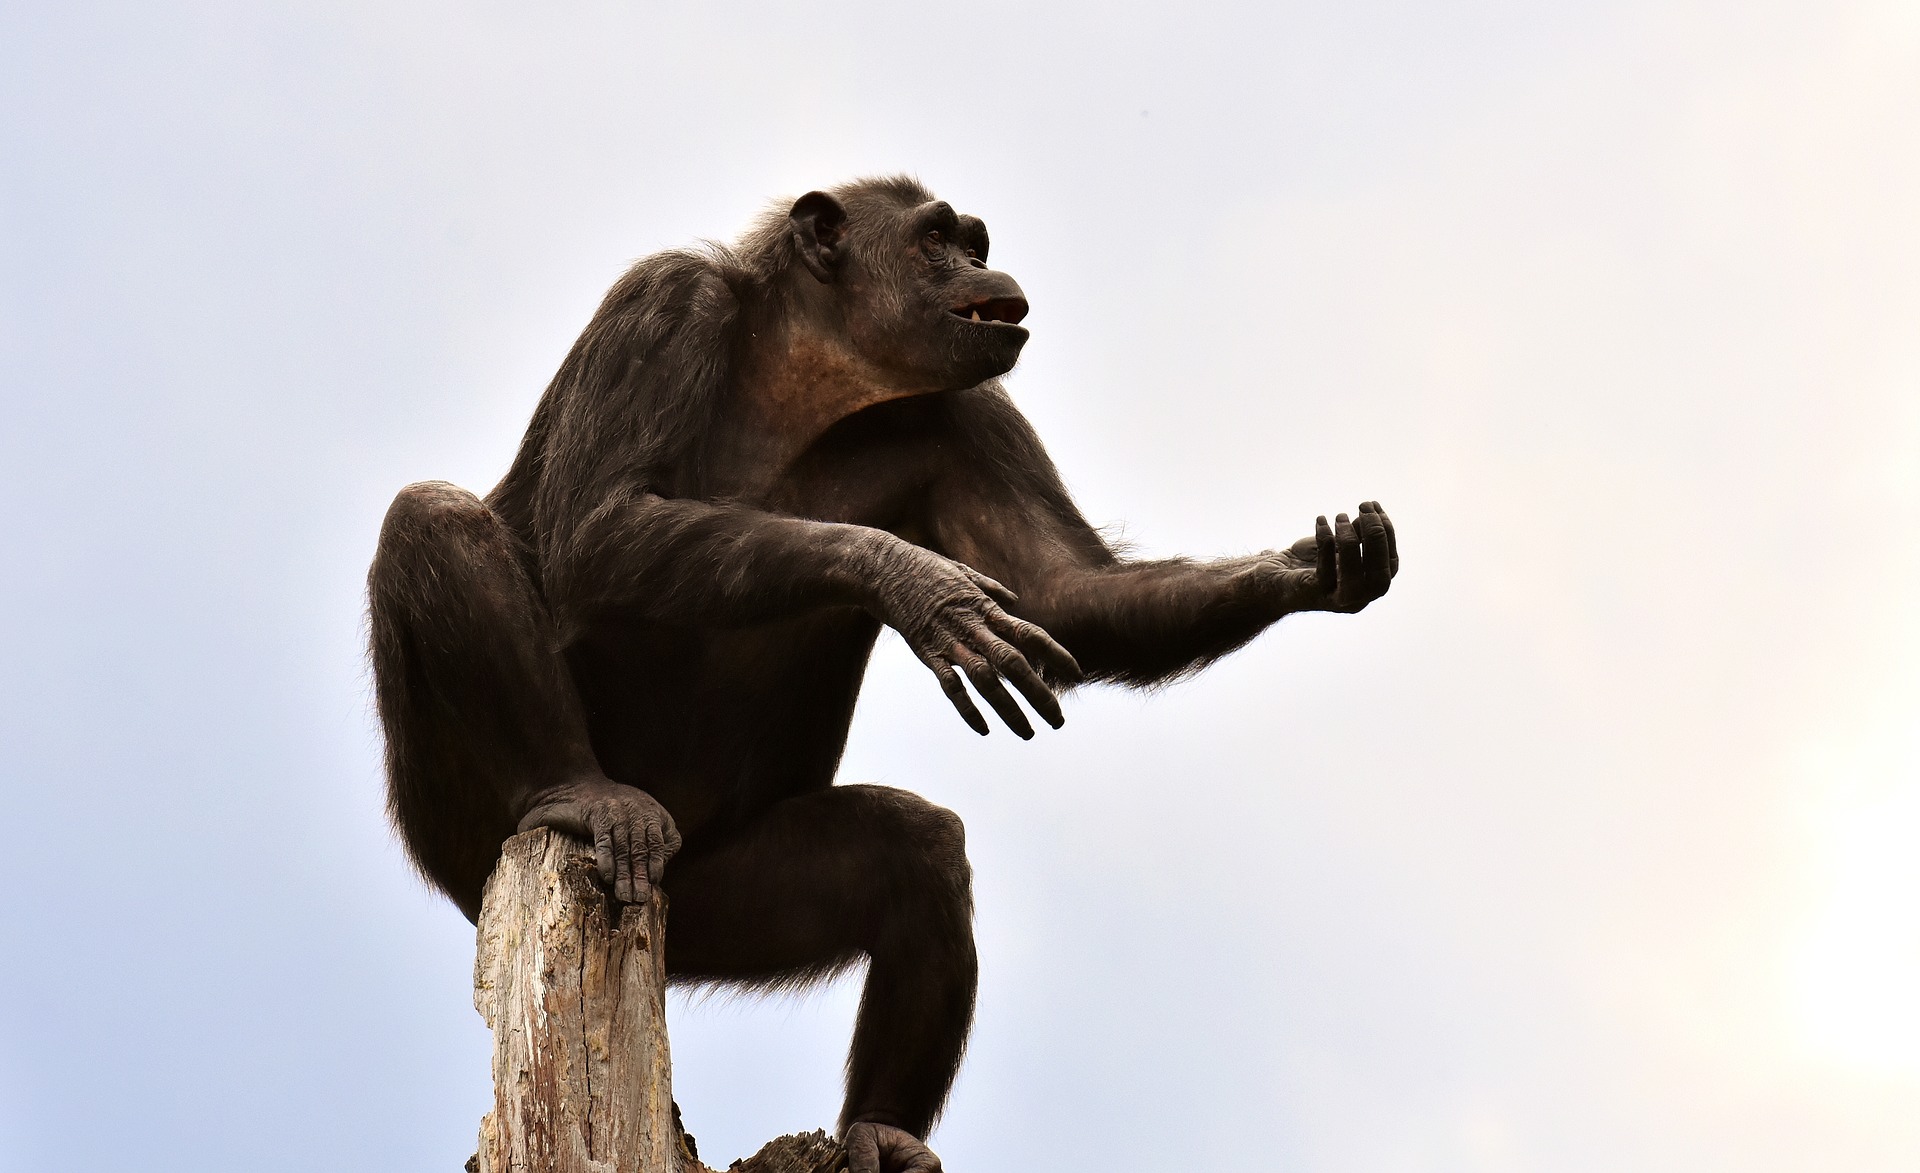 Chimpanzee Sitting on Top of a Dead Tree by Alexas_Fotos